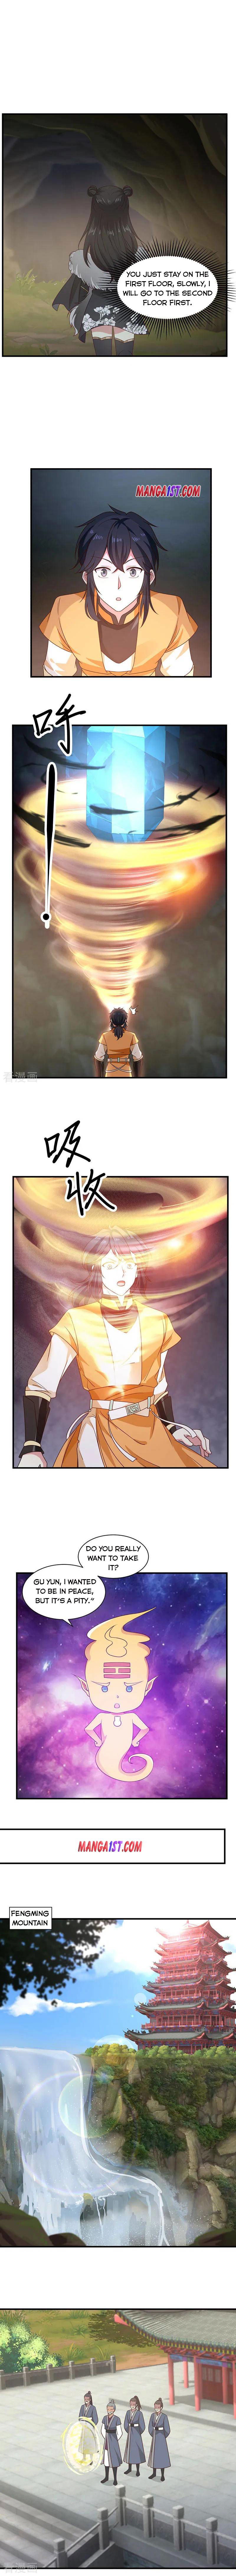 Chaos Alchemist Chapter 96 page 3